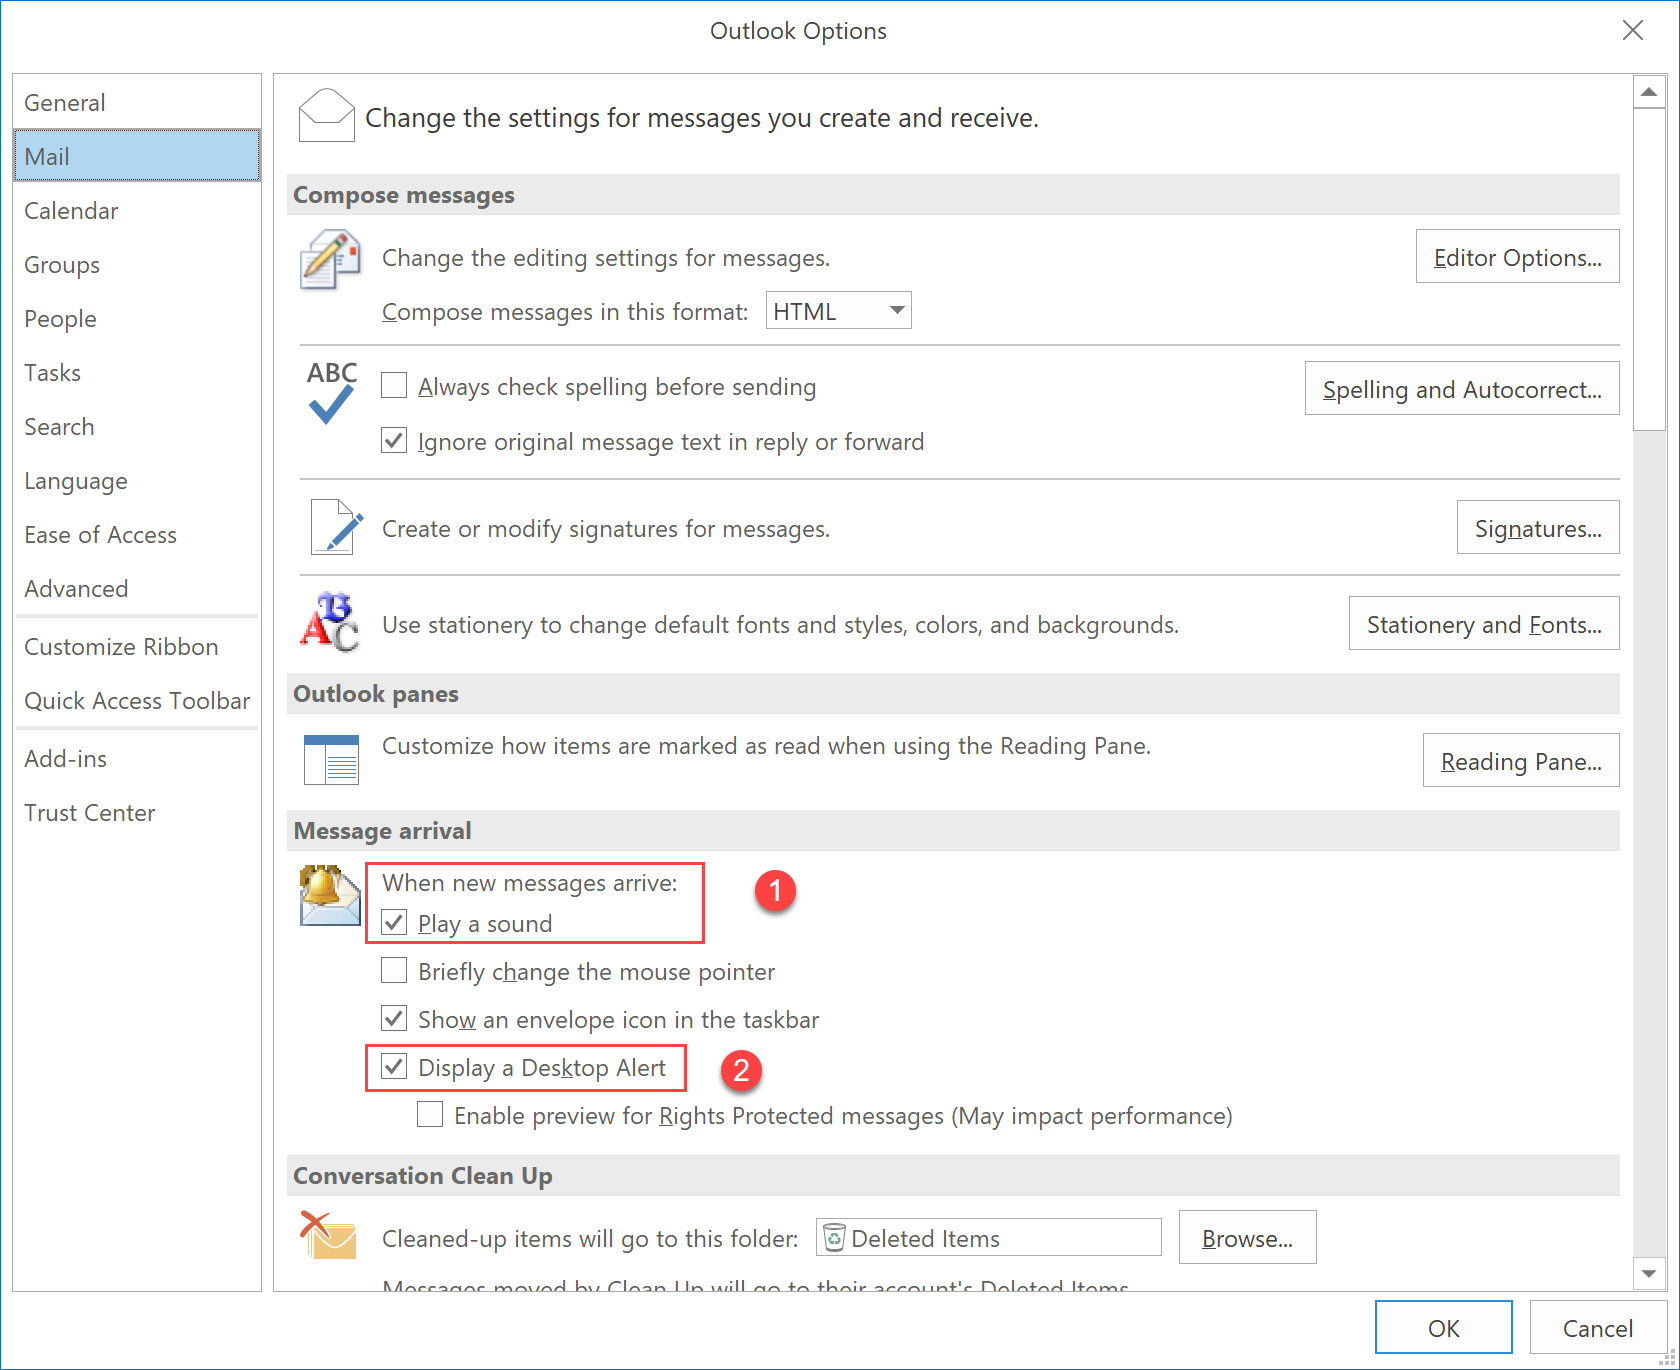 Screenshot: Message Arrival settings in Outlook